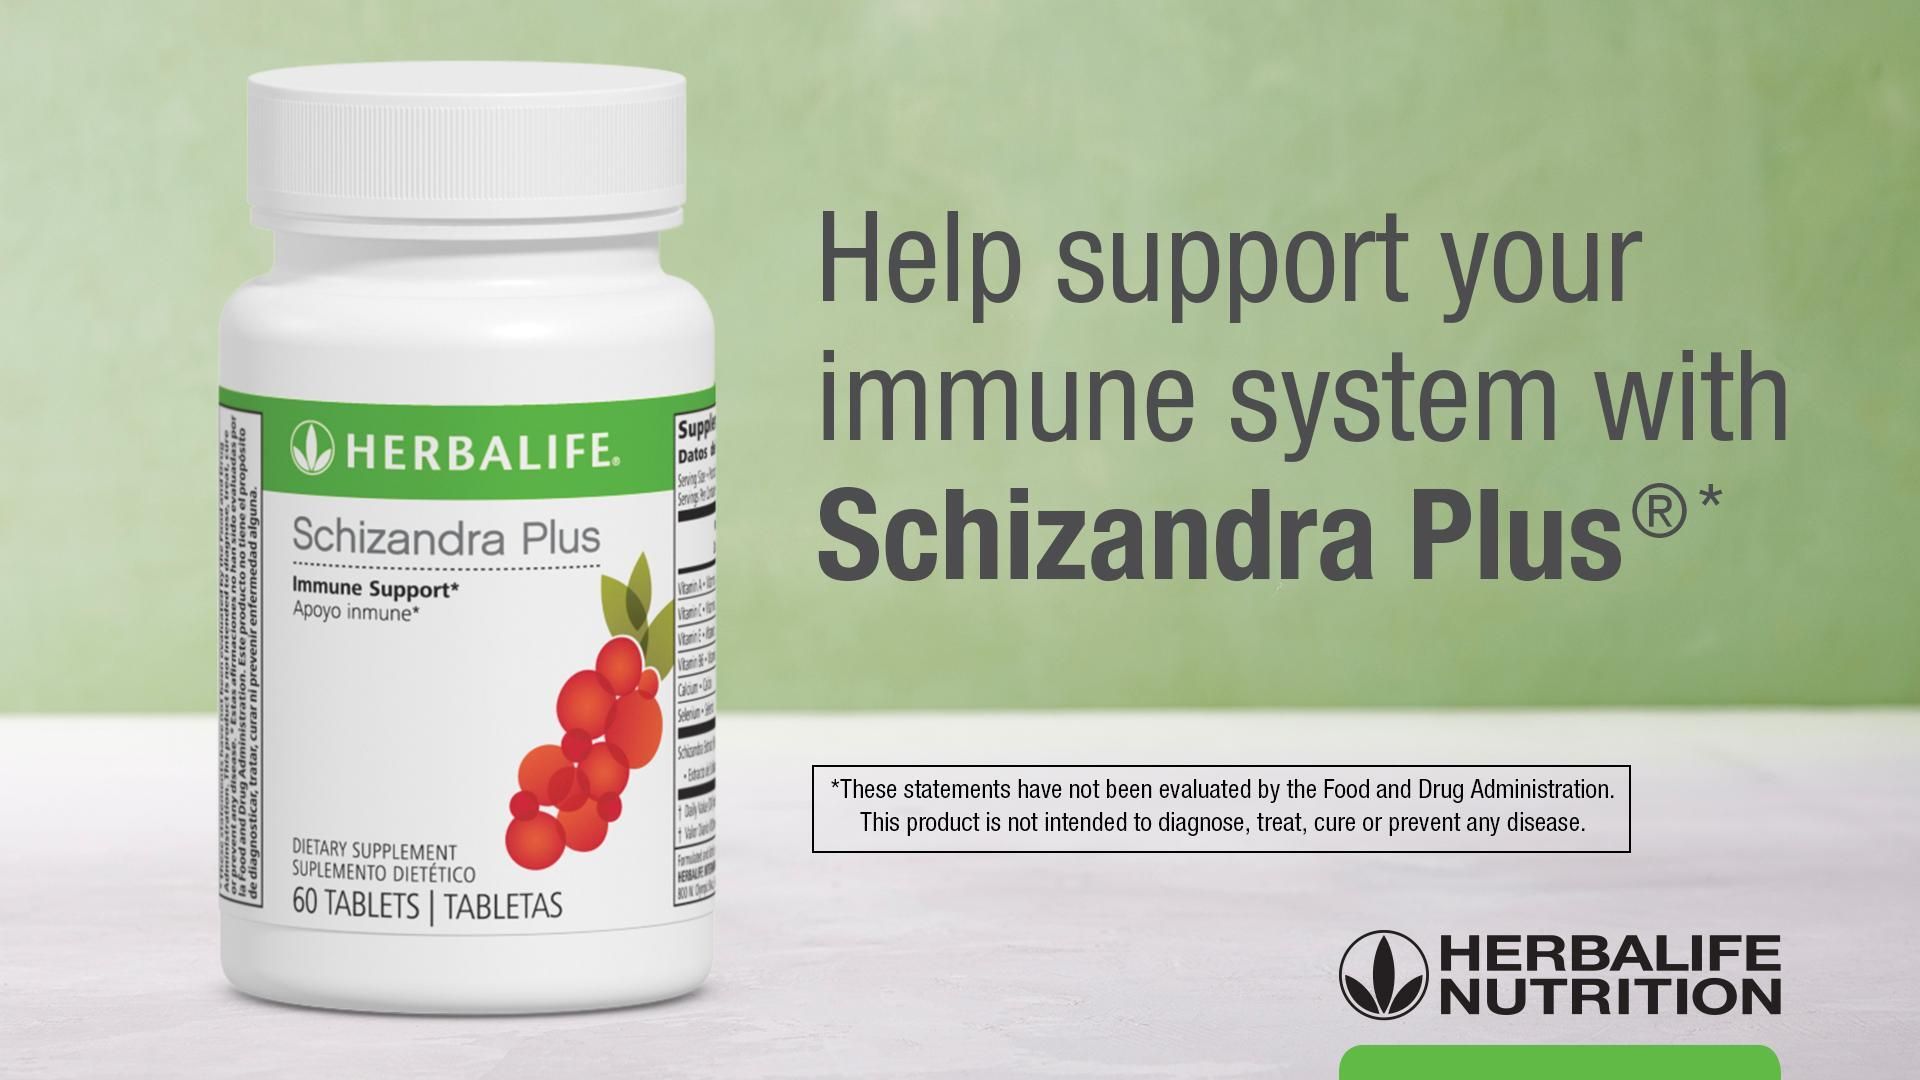 Schizandra Plus: Know the Products